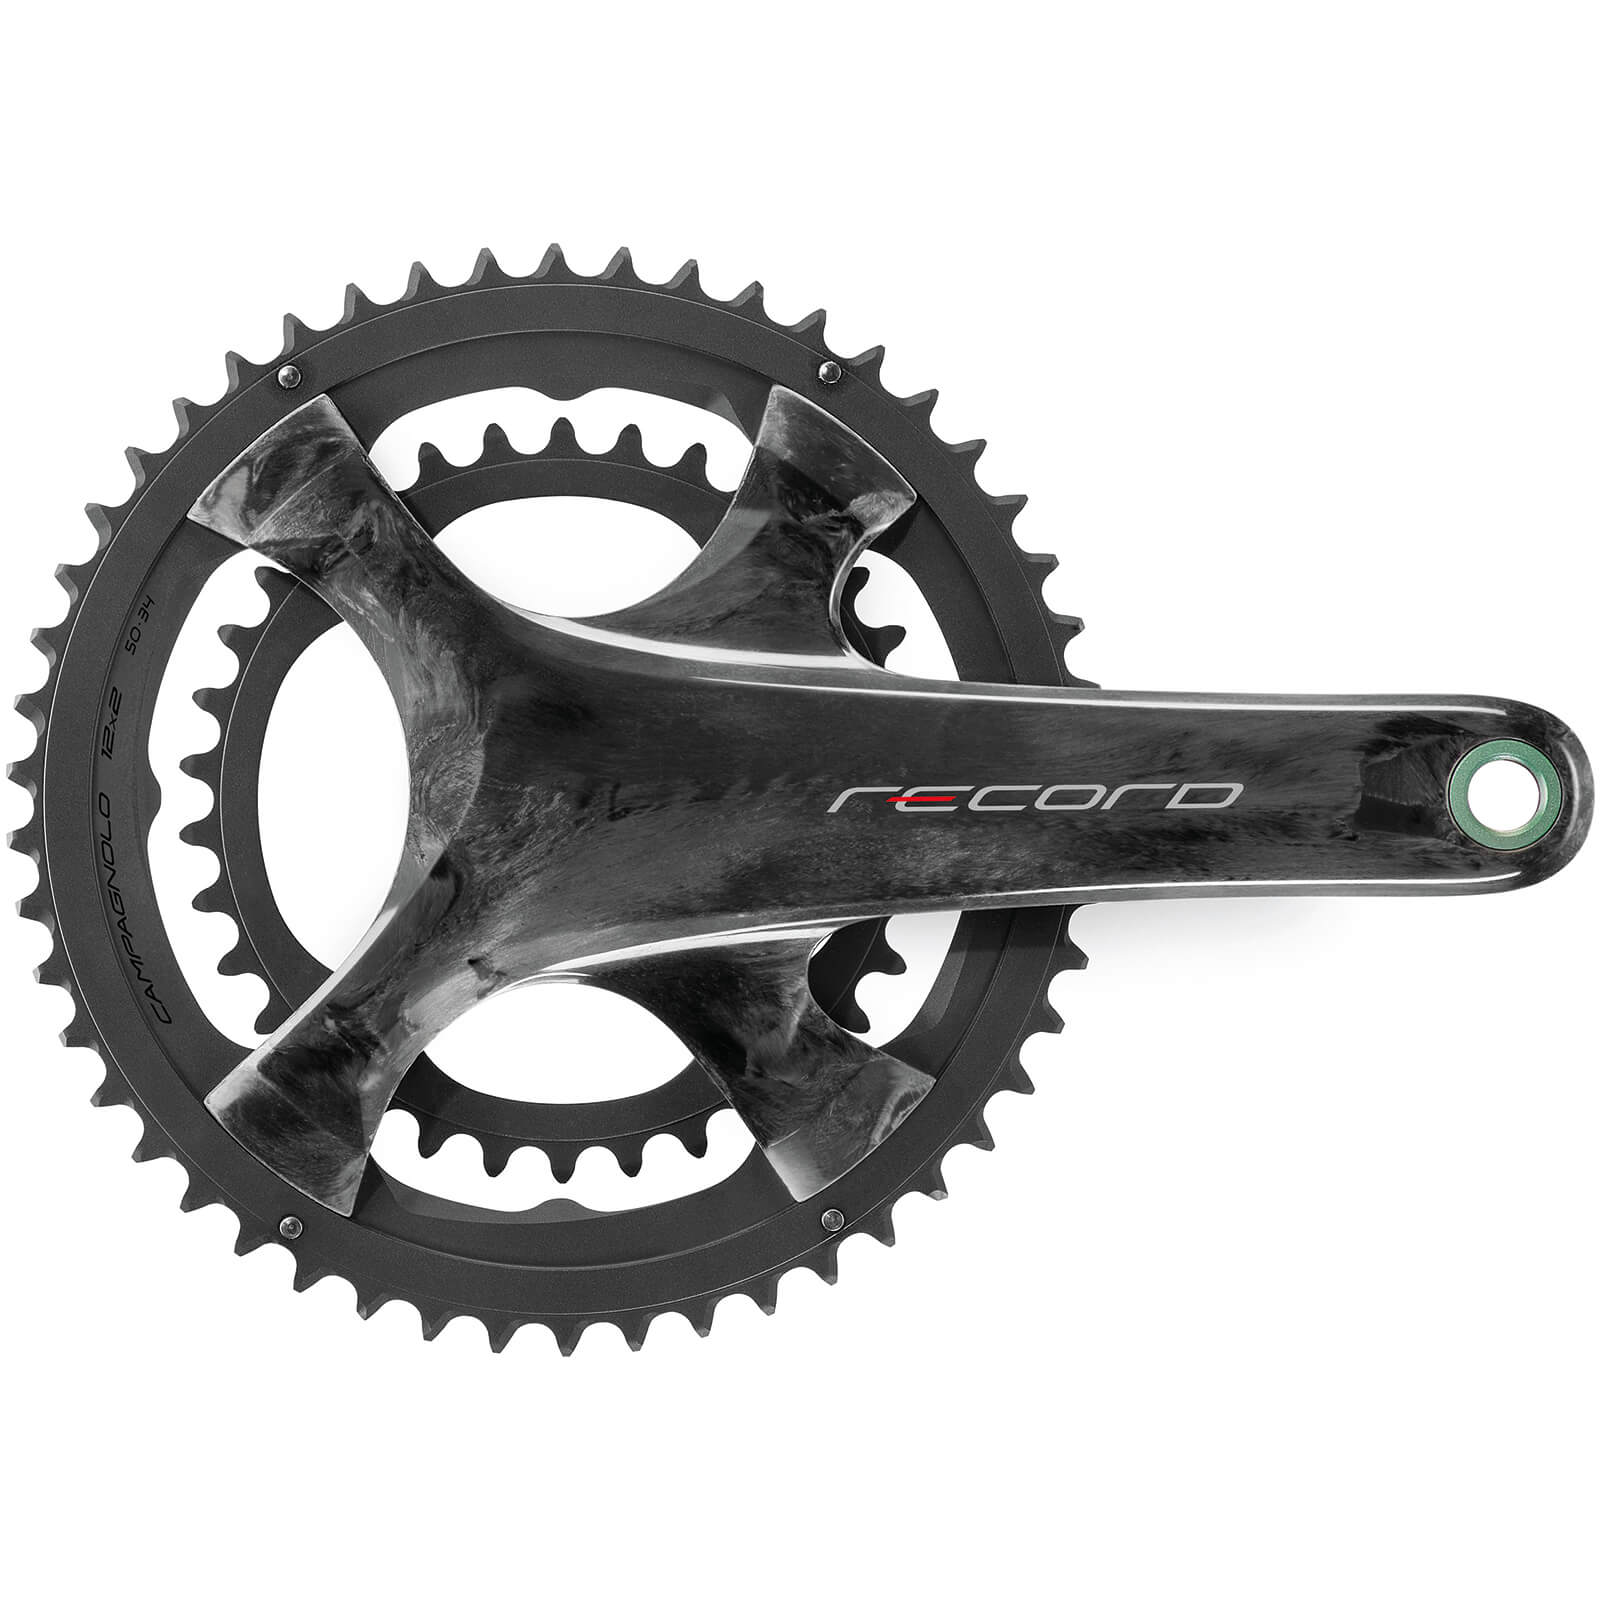 Campagnolo Record UT Carbon 12 Speed Chainset - 50-34T - 172.5mm